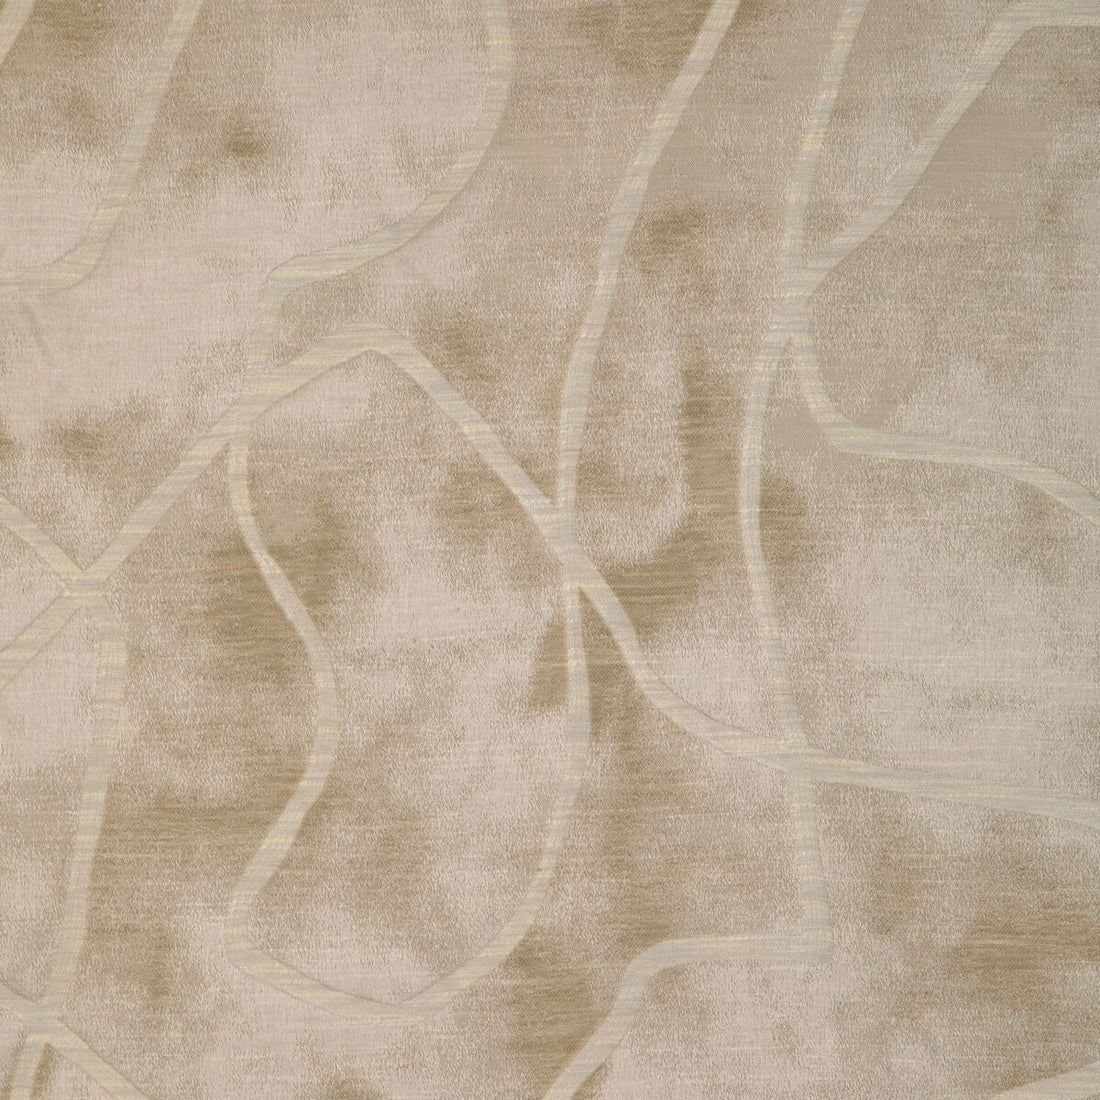 Poetic Motion fabric in sand color - pattern 36808.106.0 - by Kravet Design in the Candice Olson collection